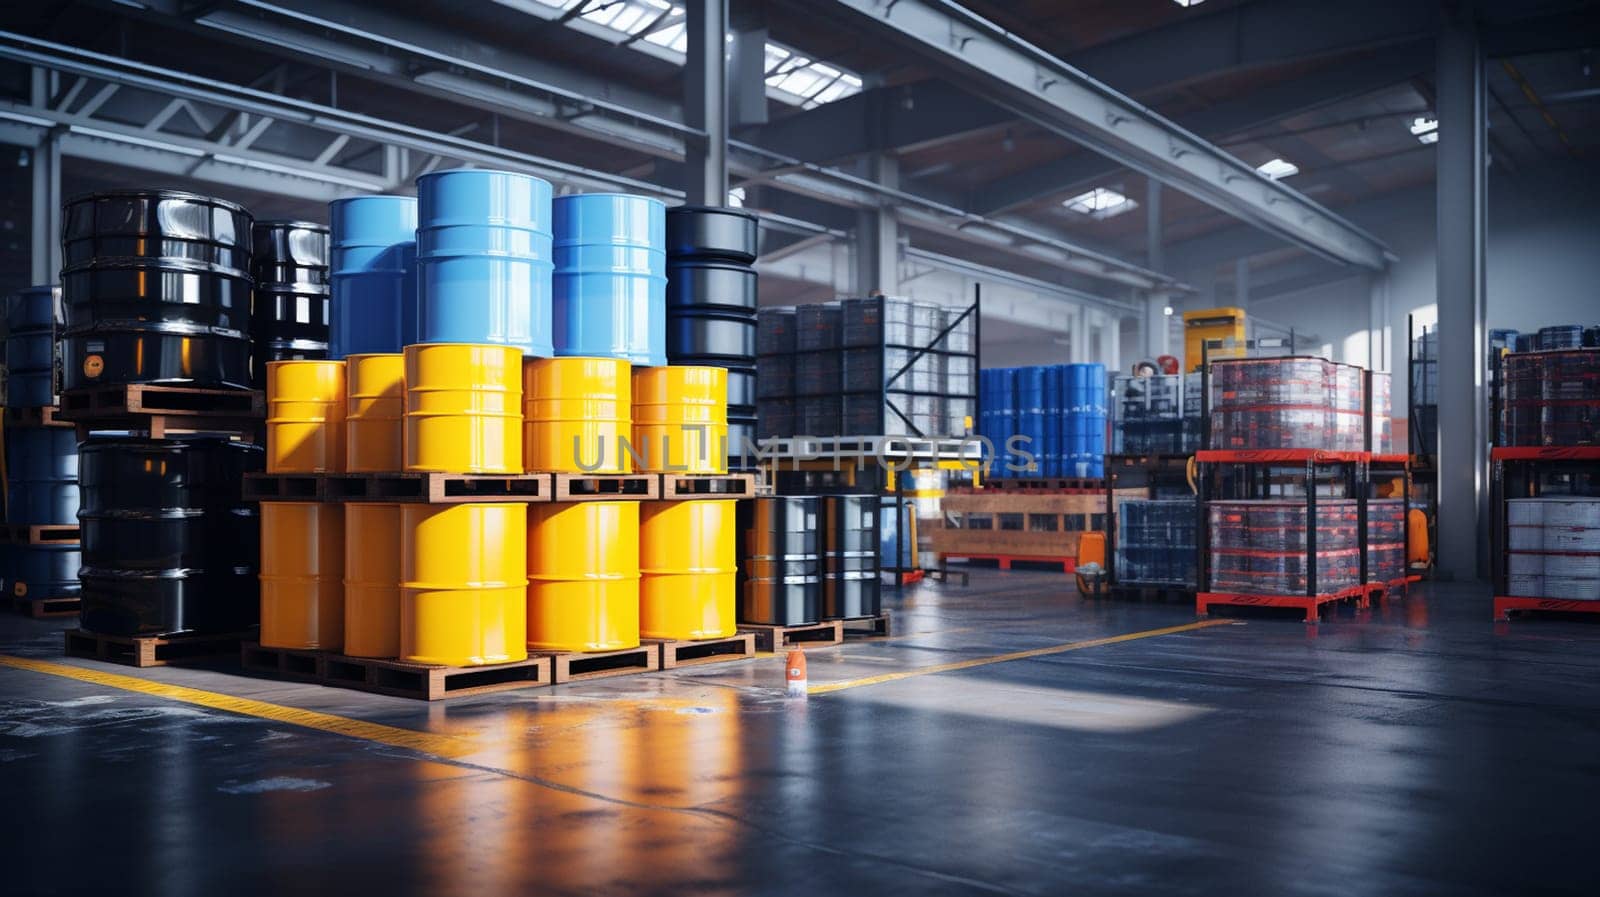 Chemical Barrels. Warehouse of chemical products. Metal barrels with crude oil. Chemistry industry warehouse. Pallets with barrels in industrial plant. Oil storage room. by Andelov13